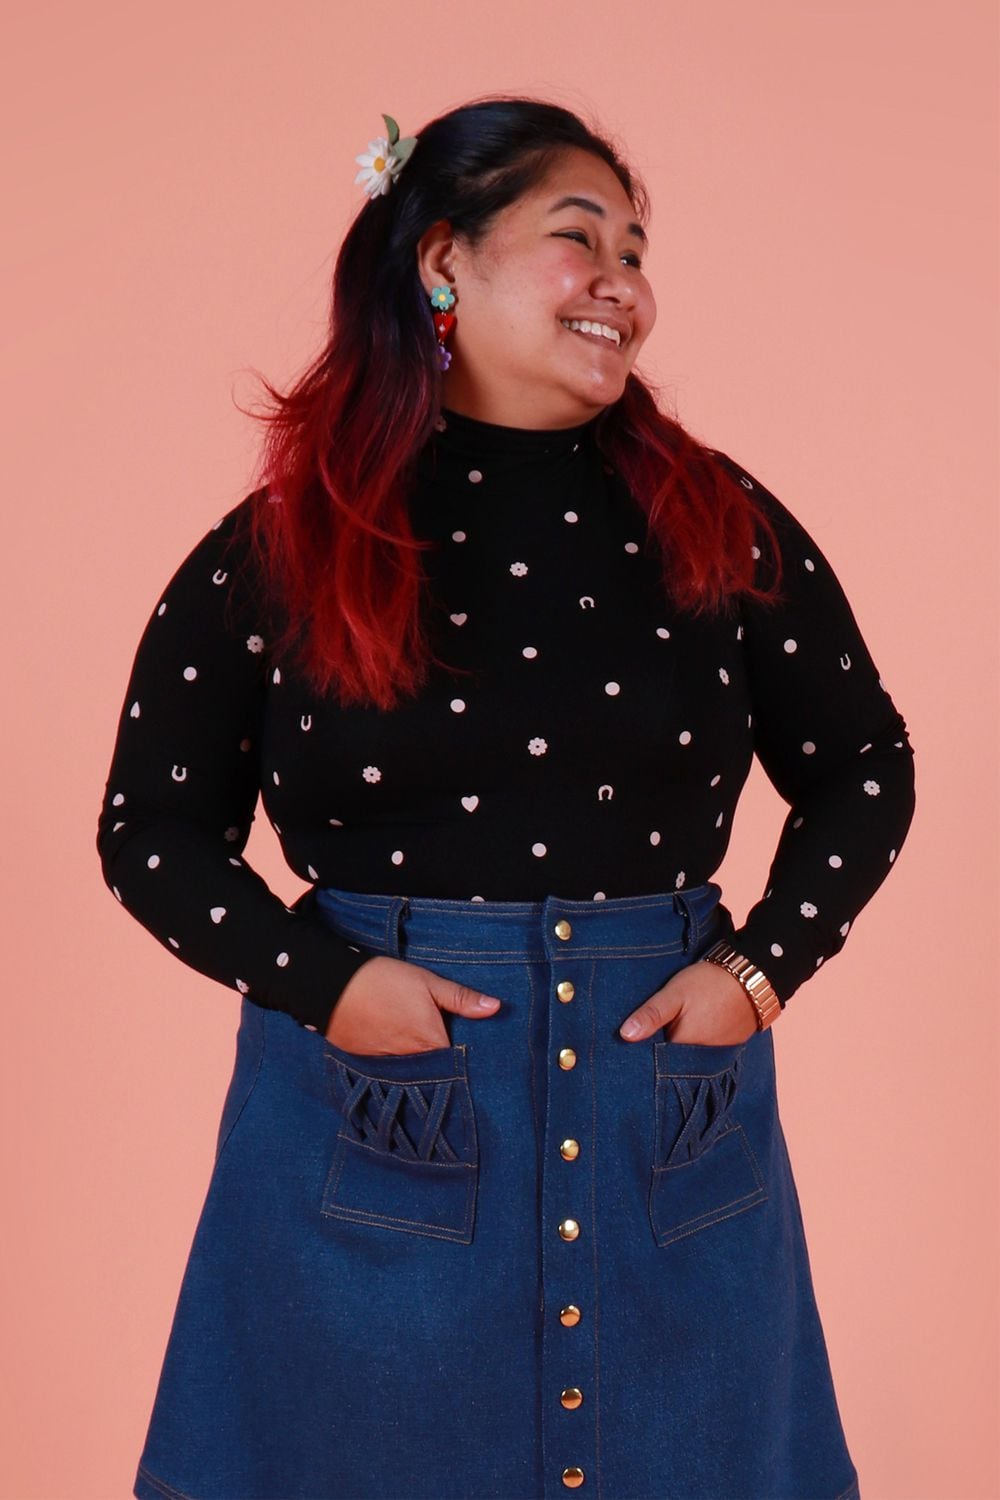 New Zealand plus size fashion blogger This is Meagan Kerr wears